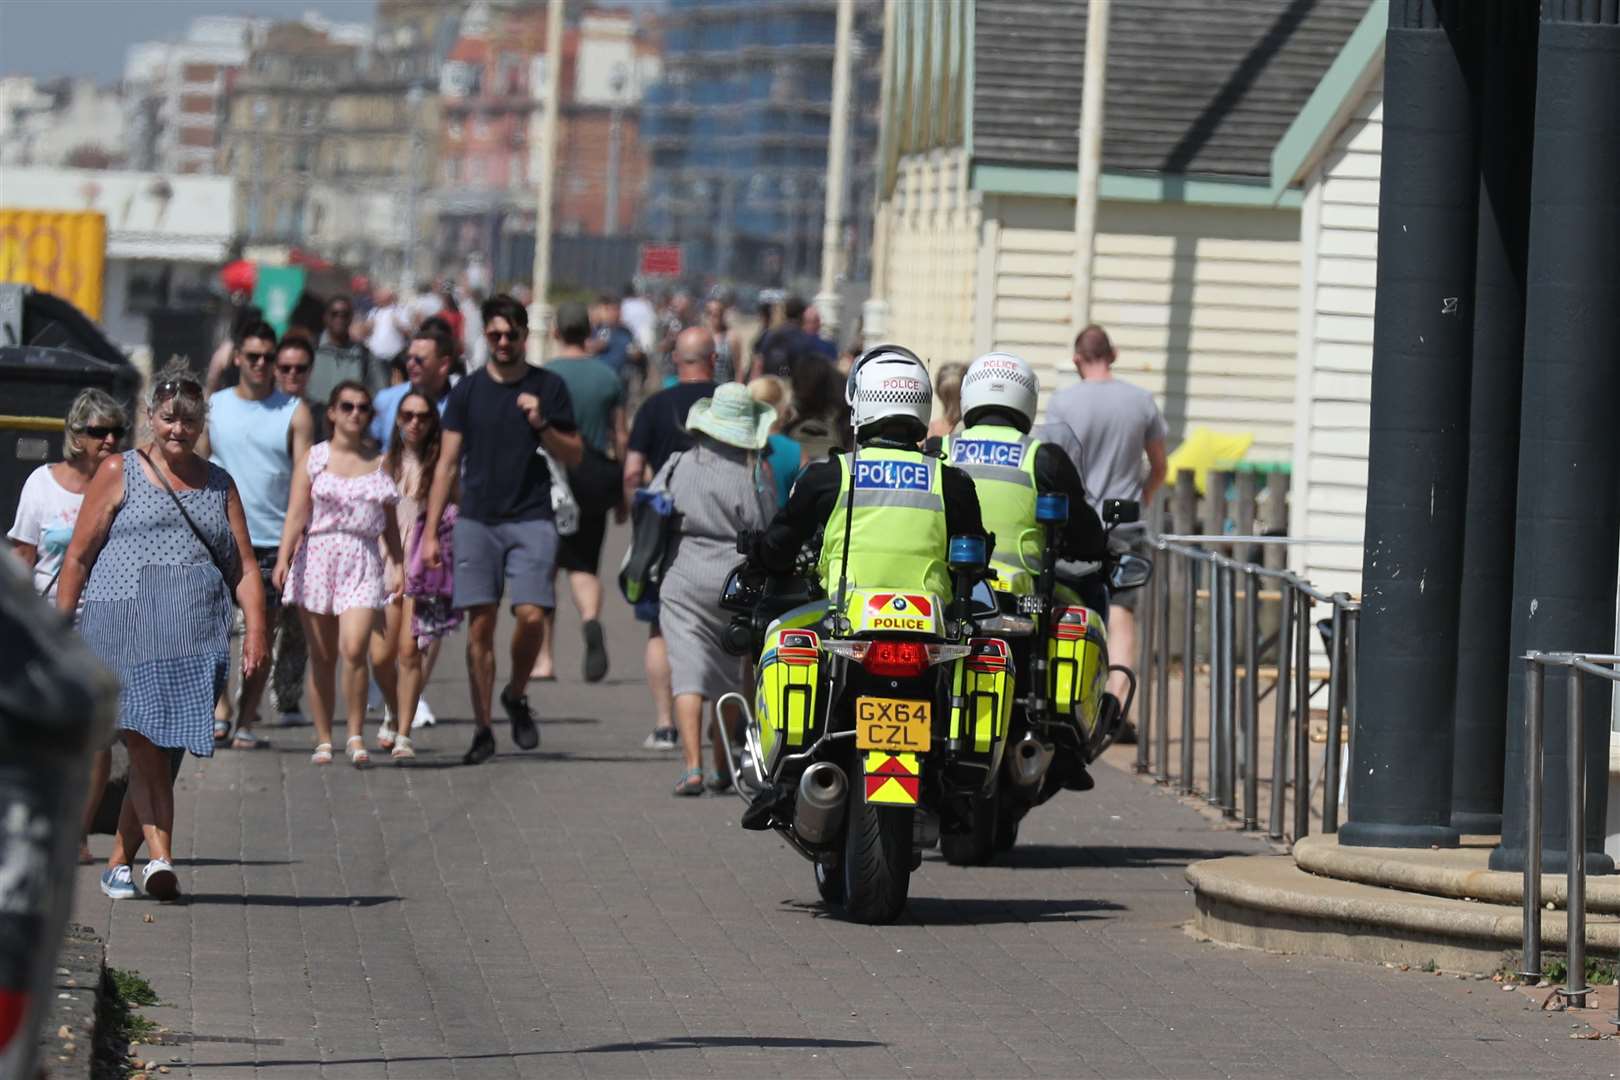 Police have been out in force to monitor numbers on promenades and beaches (Steve Parsons/PA)